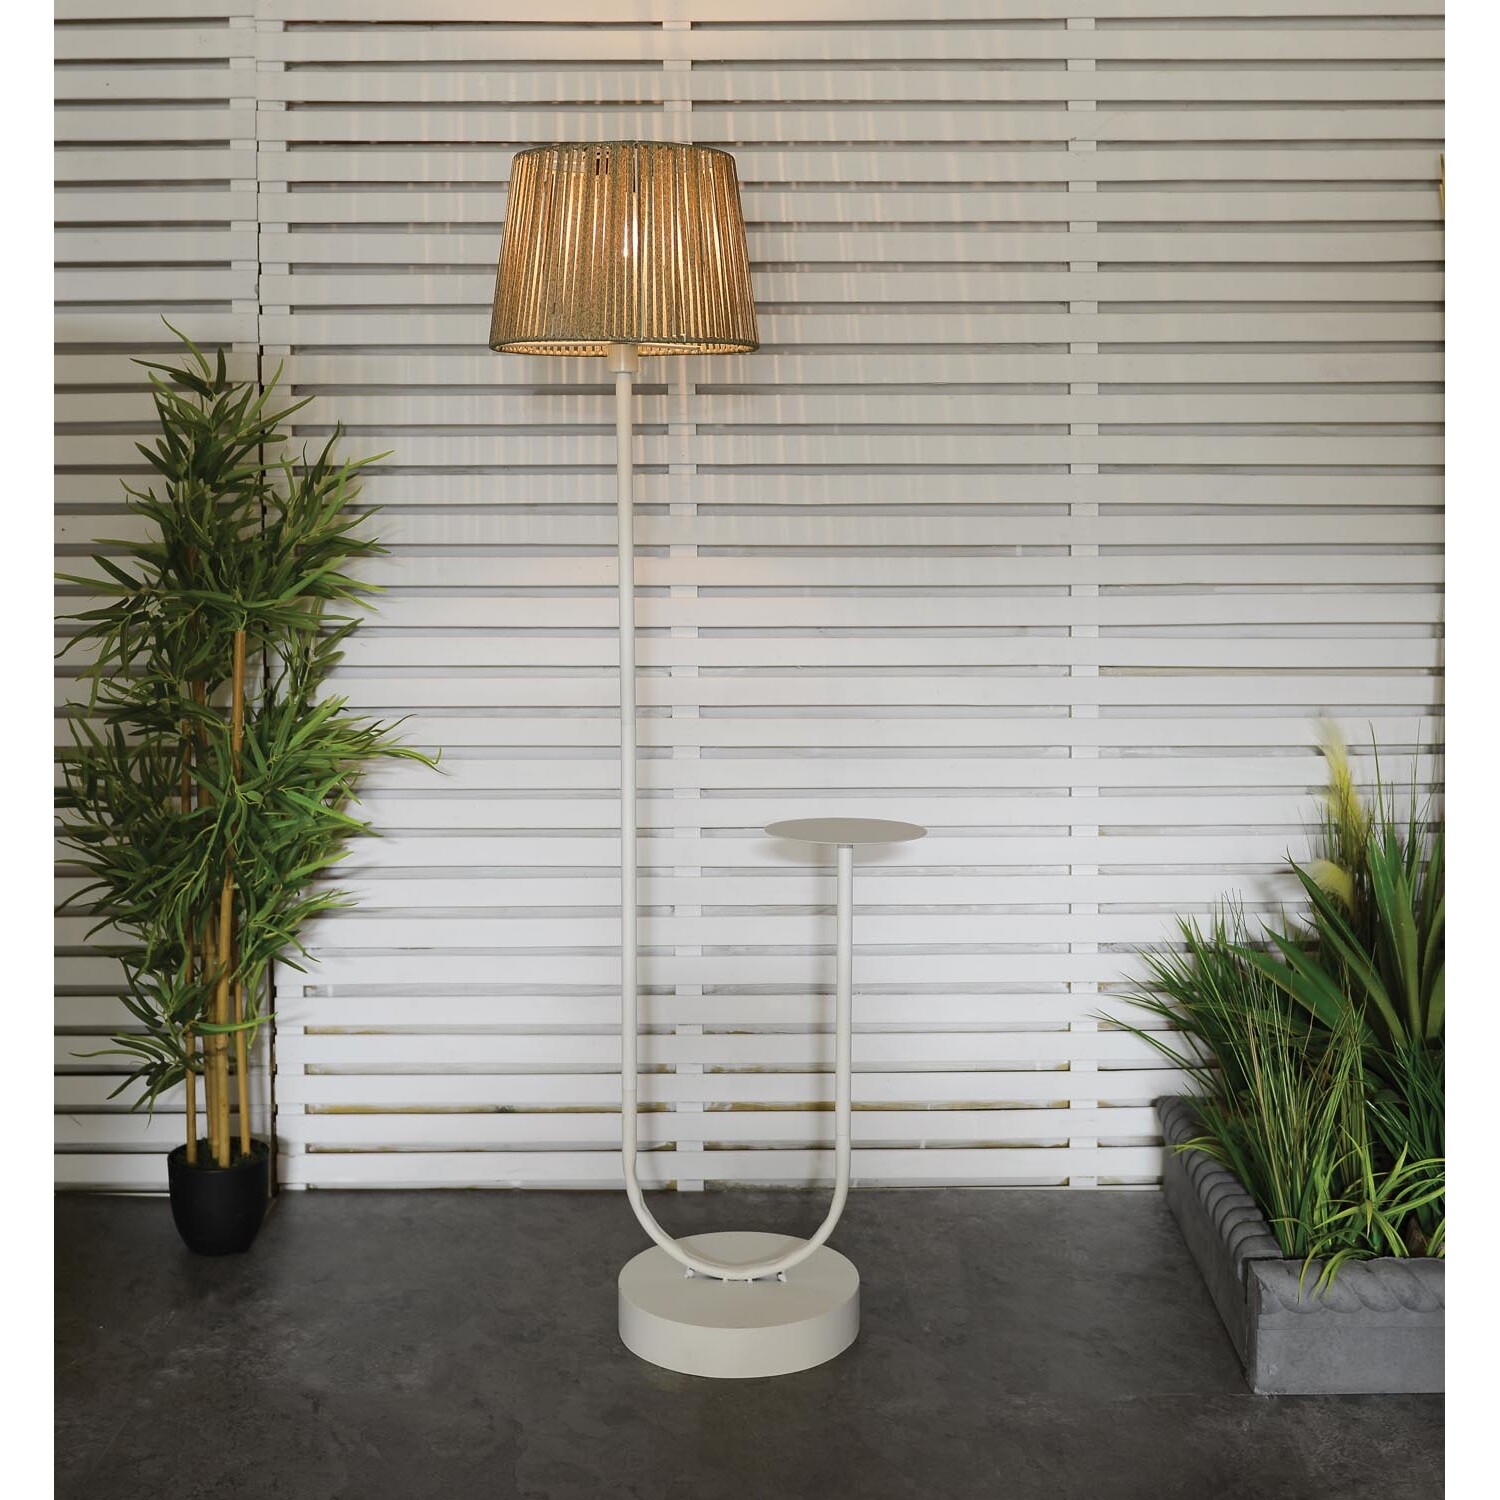 Ada Solar Floor Lamp with Table - White Image 2